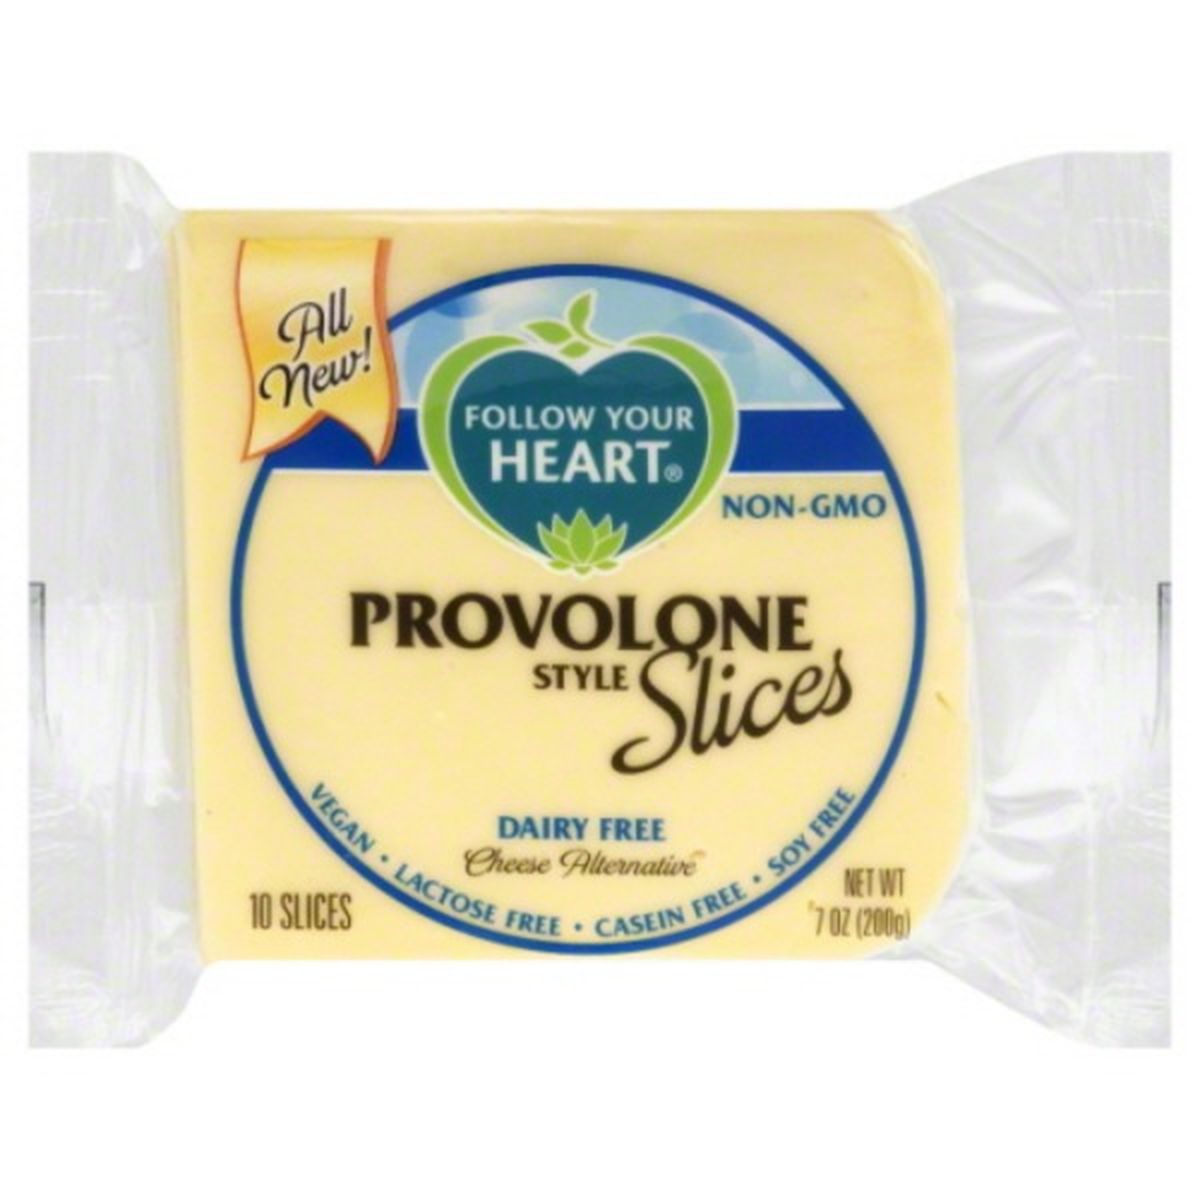 Calories in Follow Your Heart Cheese Alternative, Dairy Free, Slices, Provolone Style